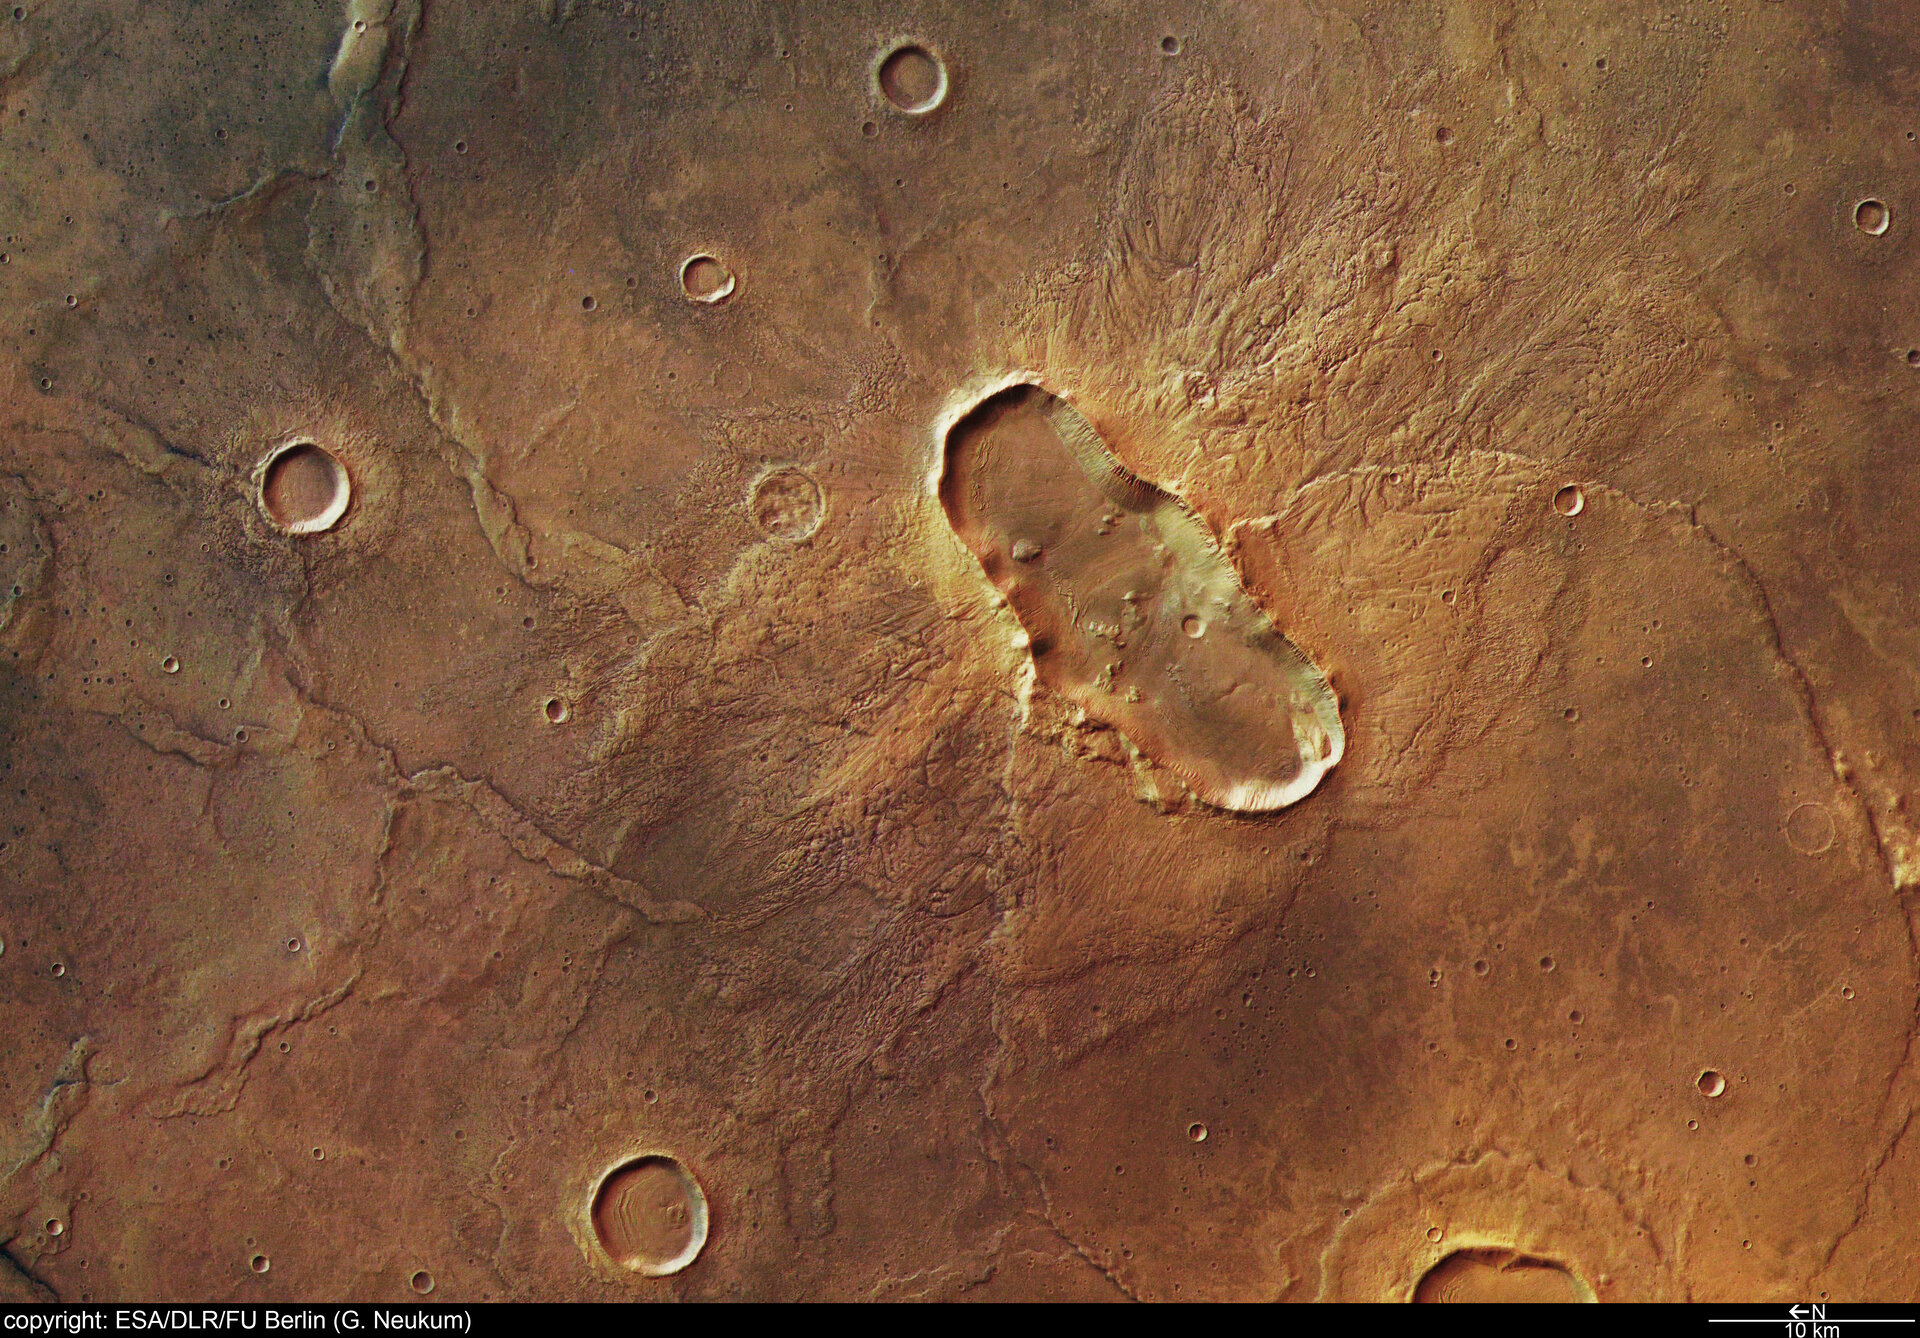 Colour view of butterfly shaped crater at Hesperia Planum pillars